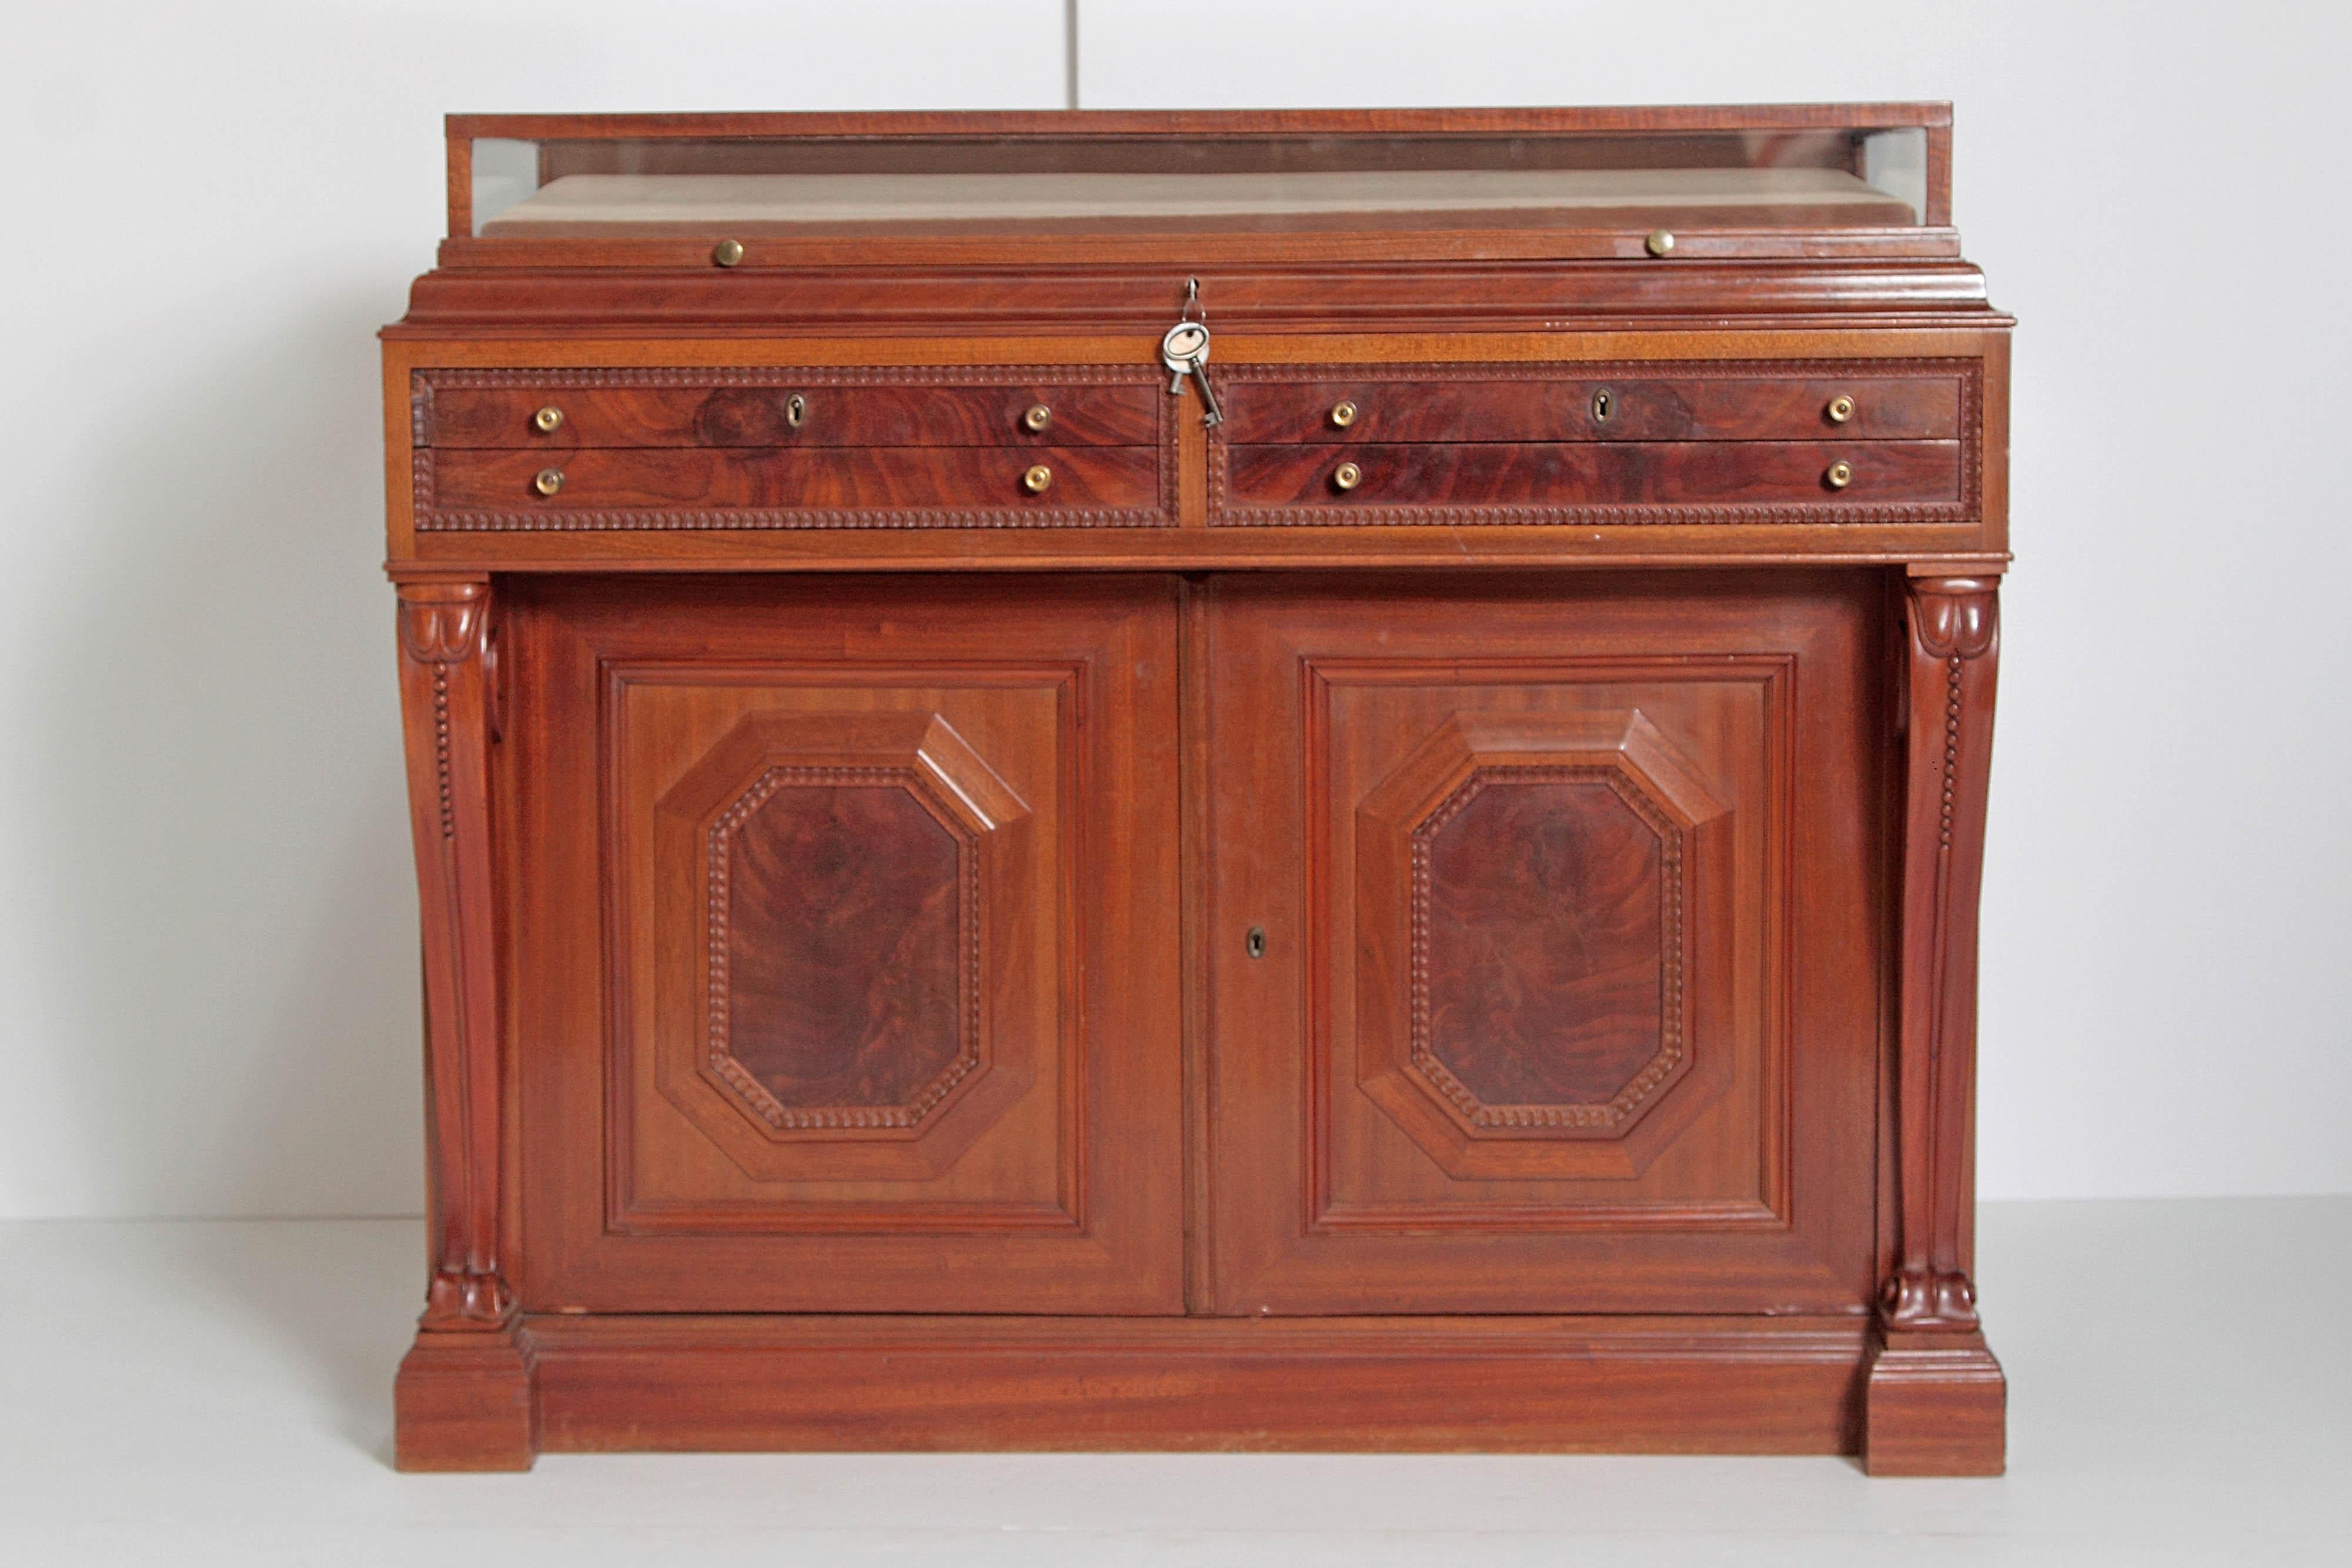 An English mahogany cabinet with a glass display / vitrine top with key, above: four lined locking drawers for silver / jewlery storage and below: a cabinet with two doors that open to a single shelf. The drawers and cabinet doors have elegant